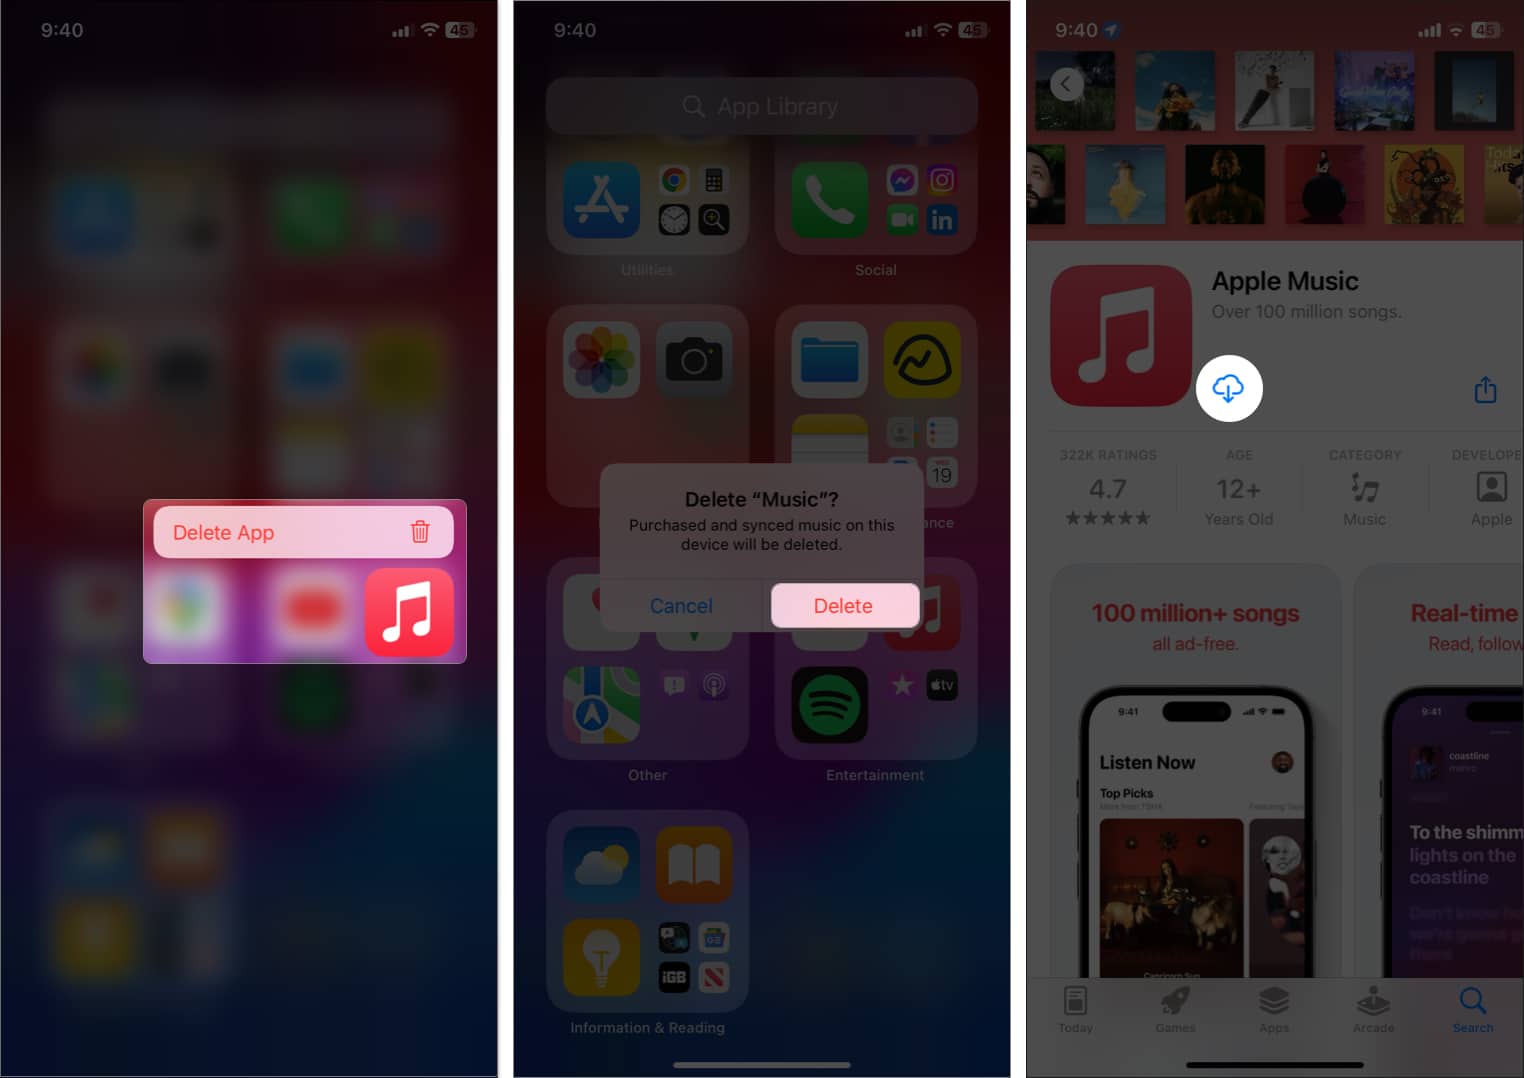 tap and hold music app, tap delete, download apple music in App store